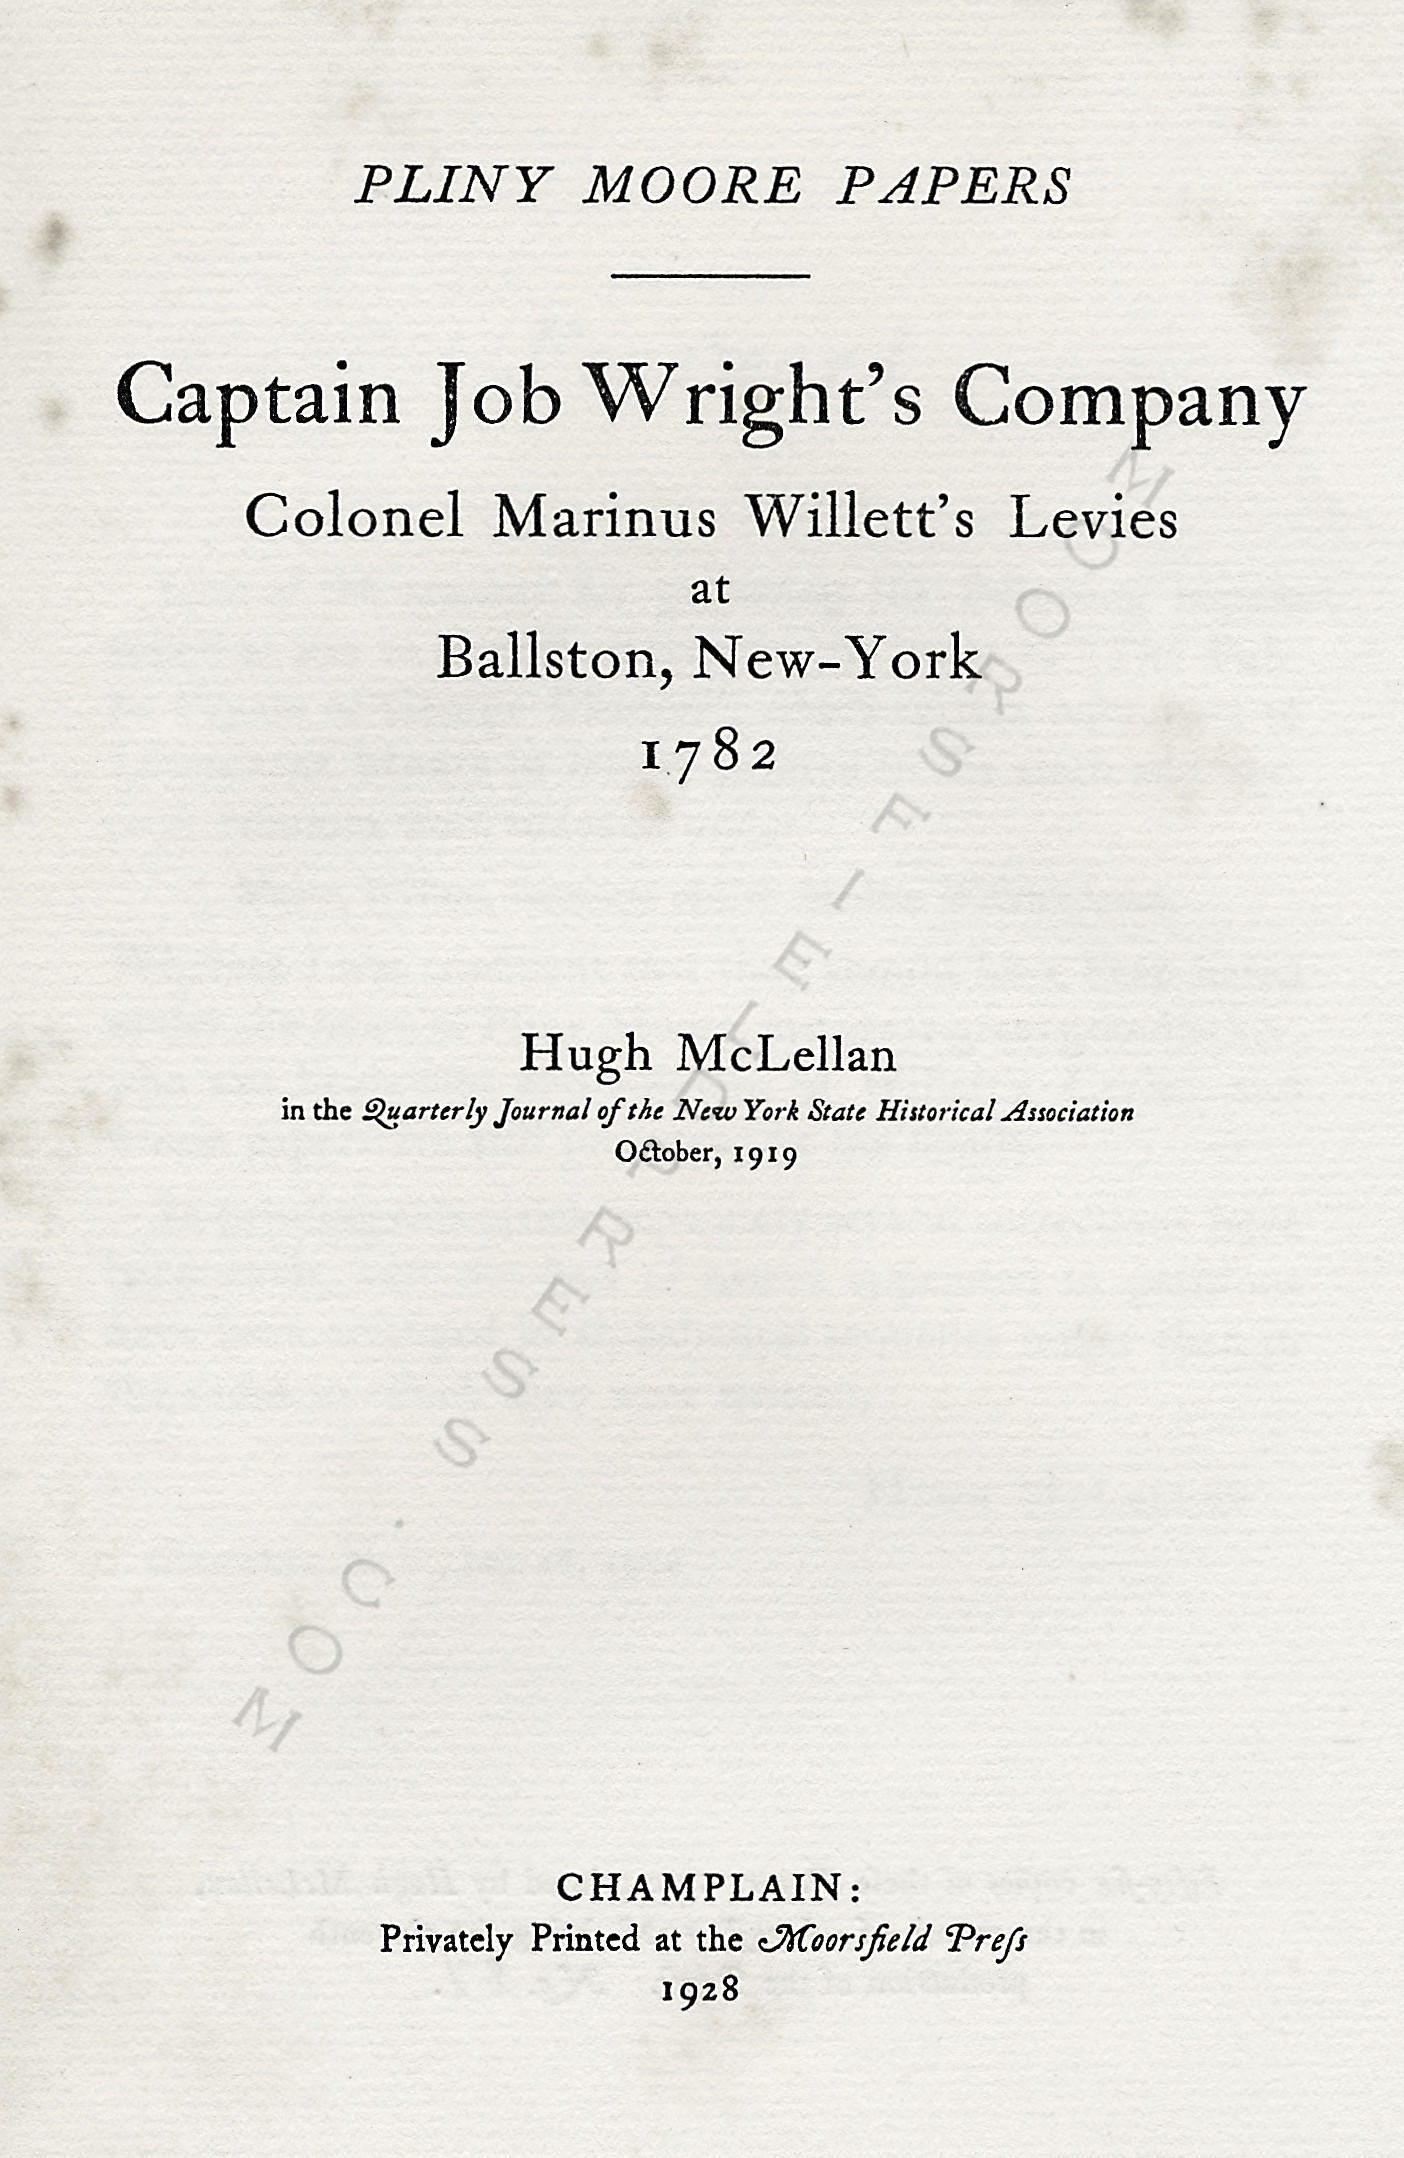 Pliny
                      Moore Papers: Captain Job Wright’s Company:
                      Colonel Marinus Willetts Levies, 1782